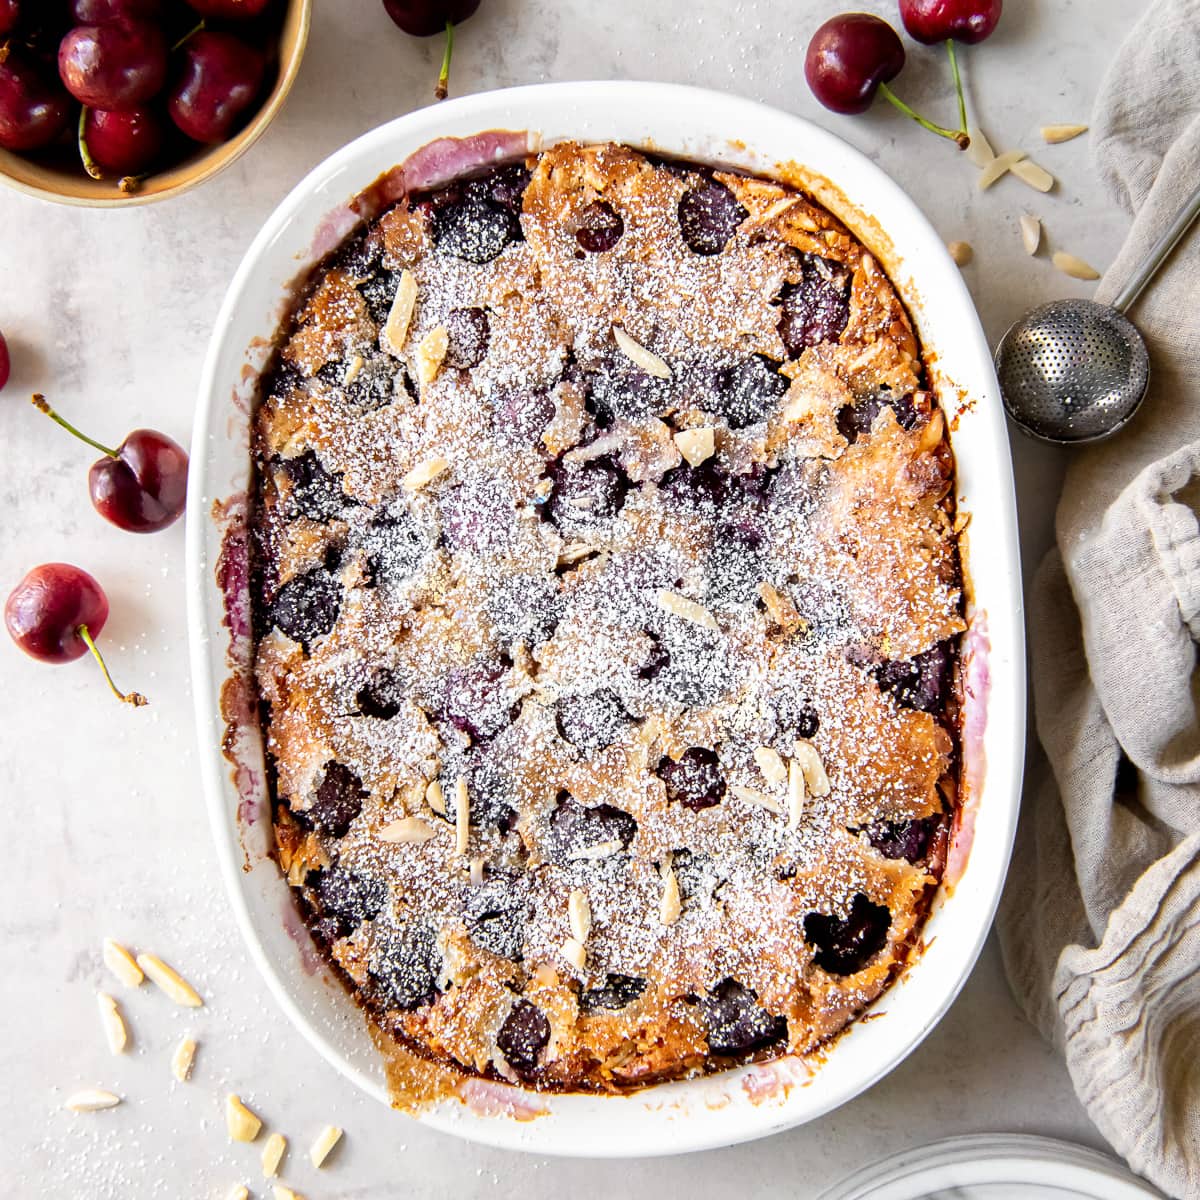 cherry clafoutis dusted with confectioners' sugar in a baking dish.